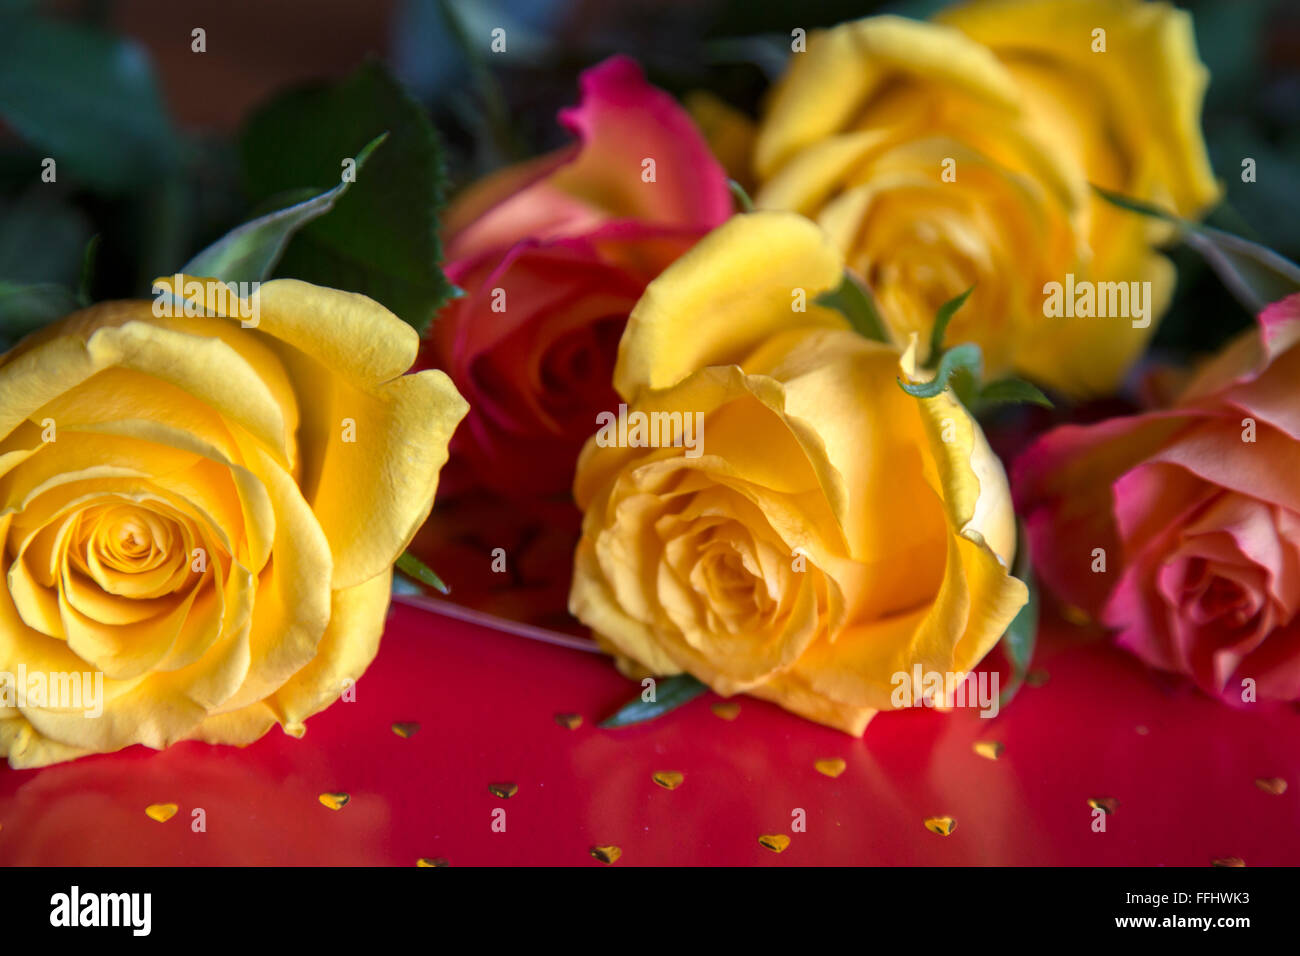 Pink and yellow roses on red background with gold hearts Stock Photo